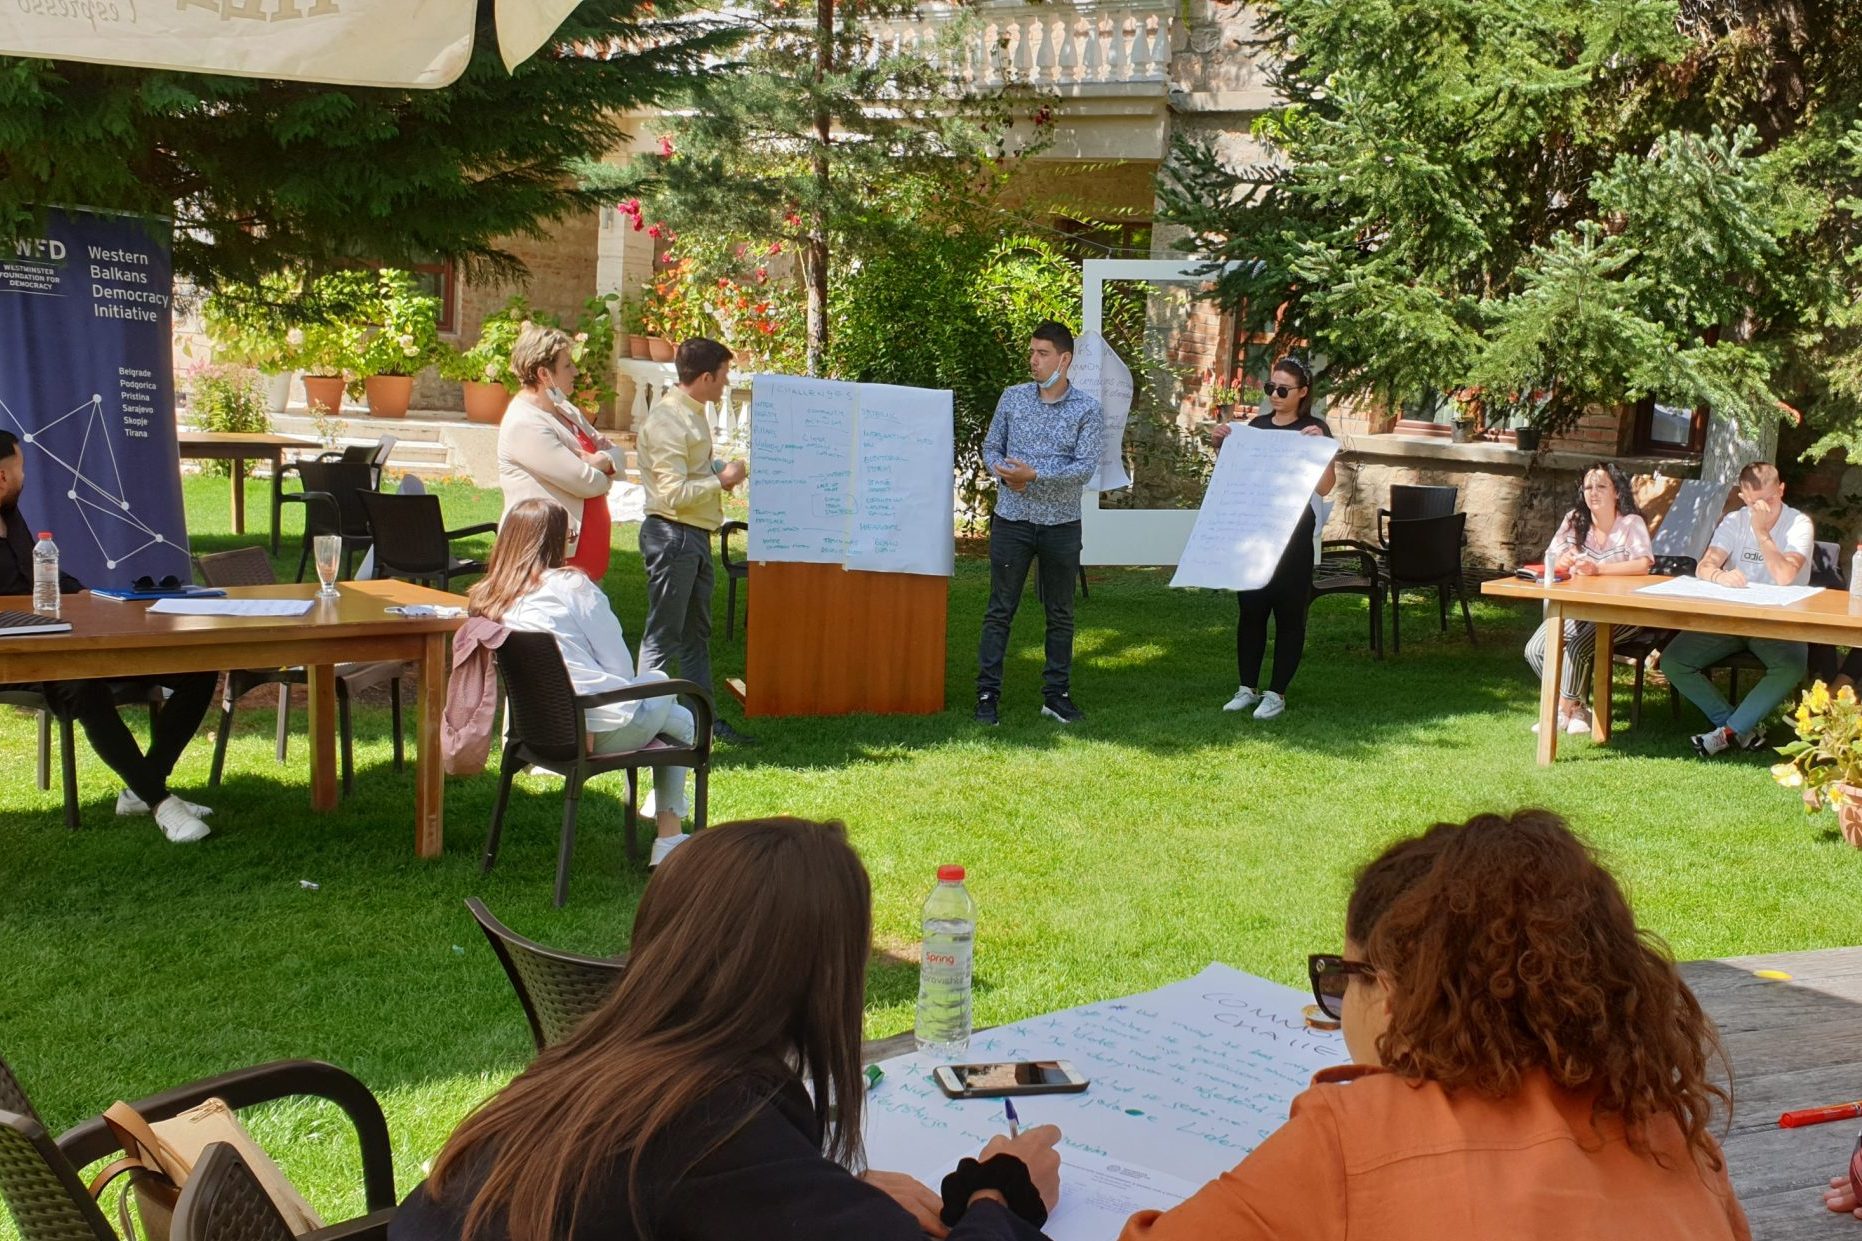 People looking at a flipchart during an outdoor workshop